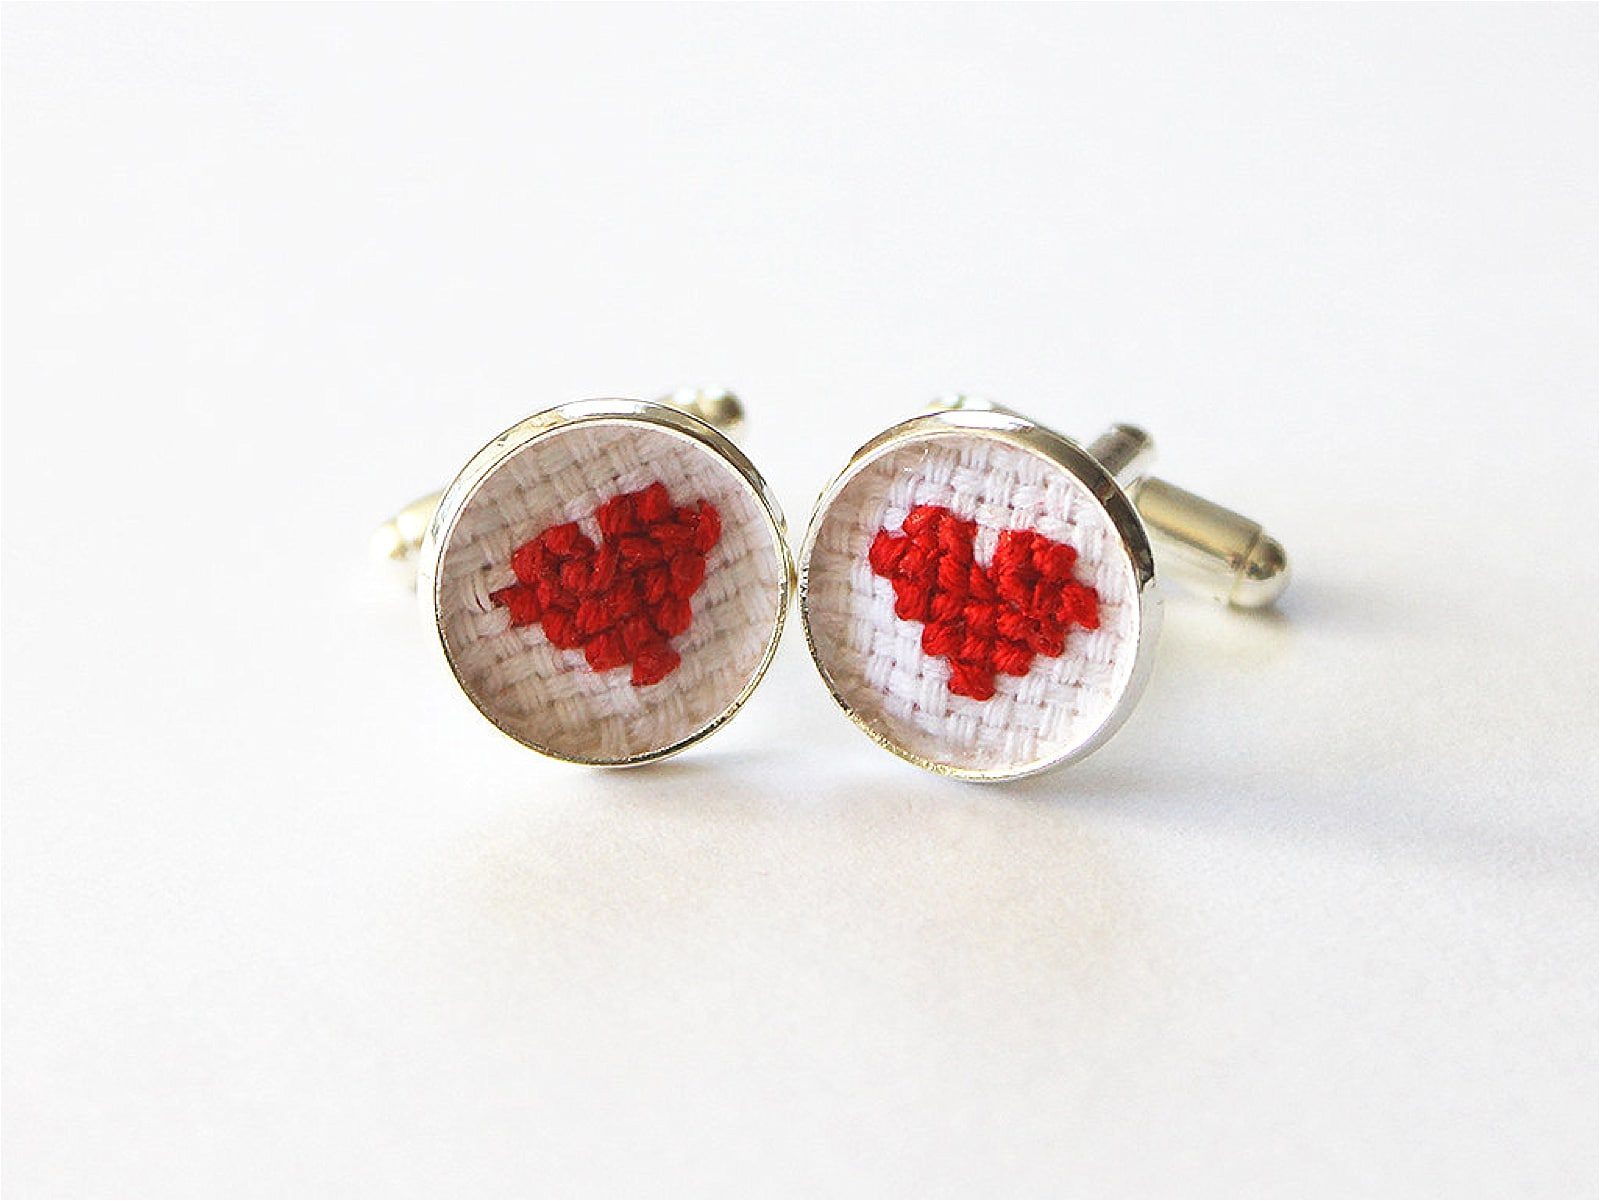 Heart Inspired Gifts for Valentines Day | Hill City Bride Virginia Wedding Blog